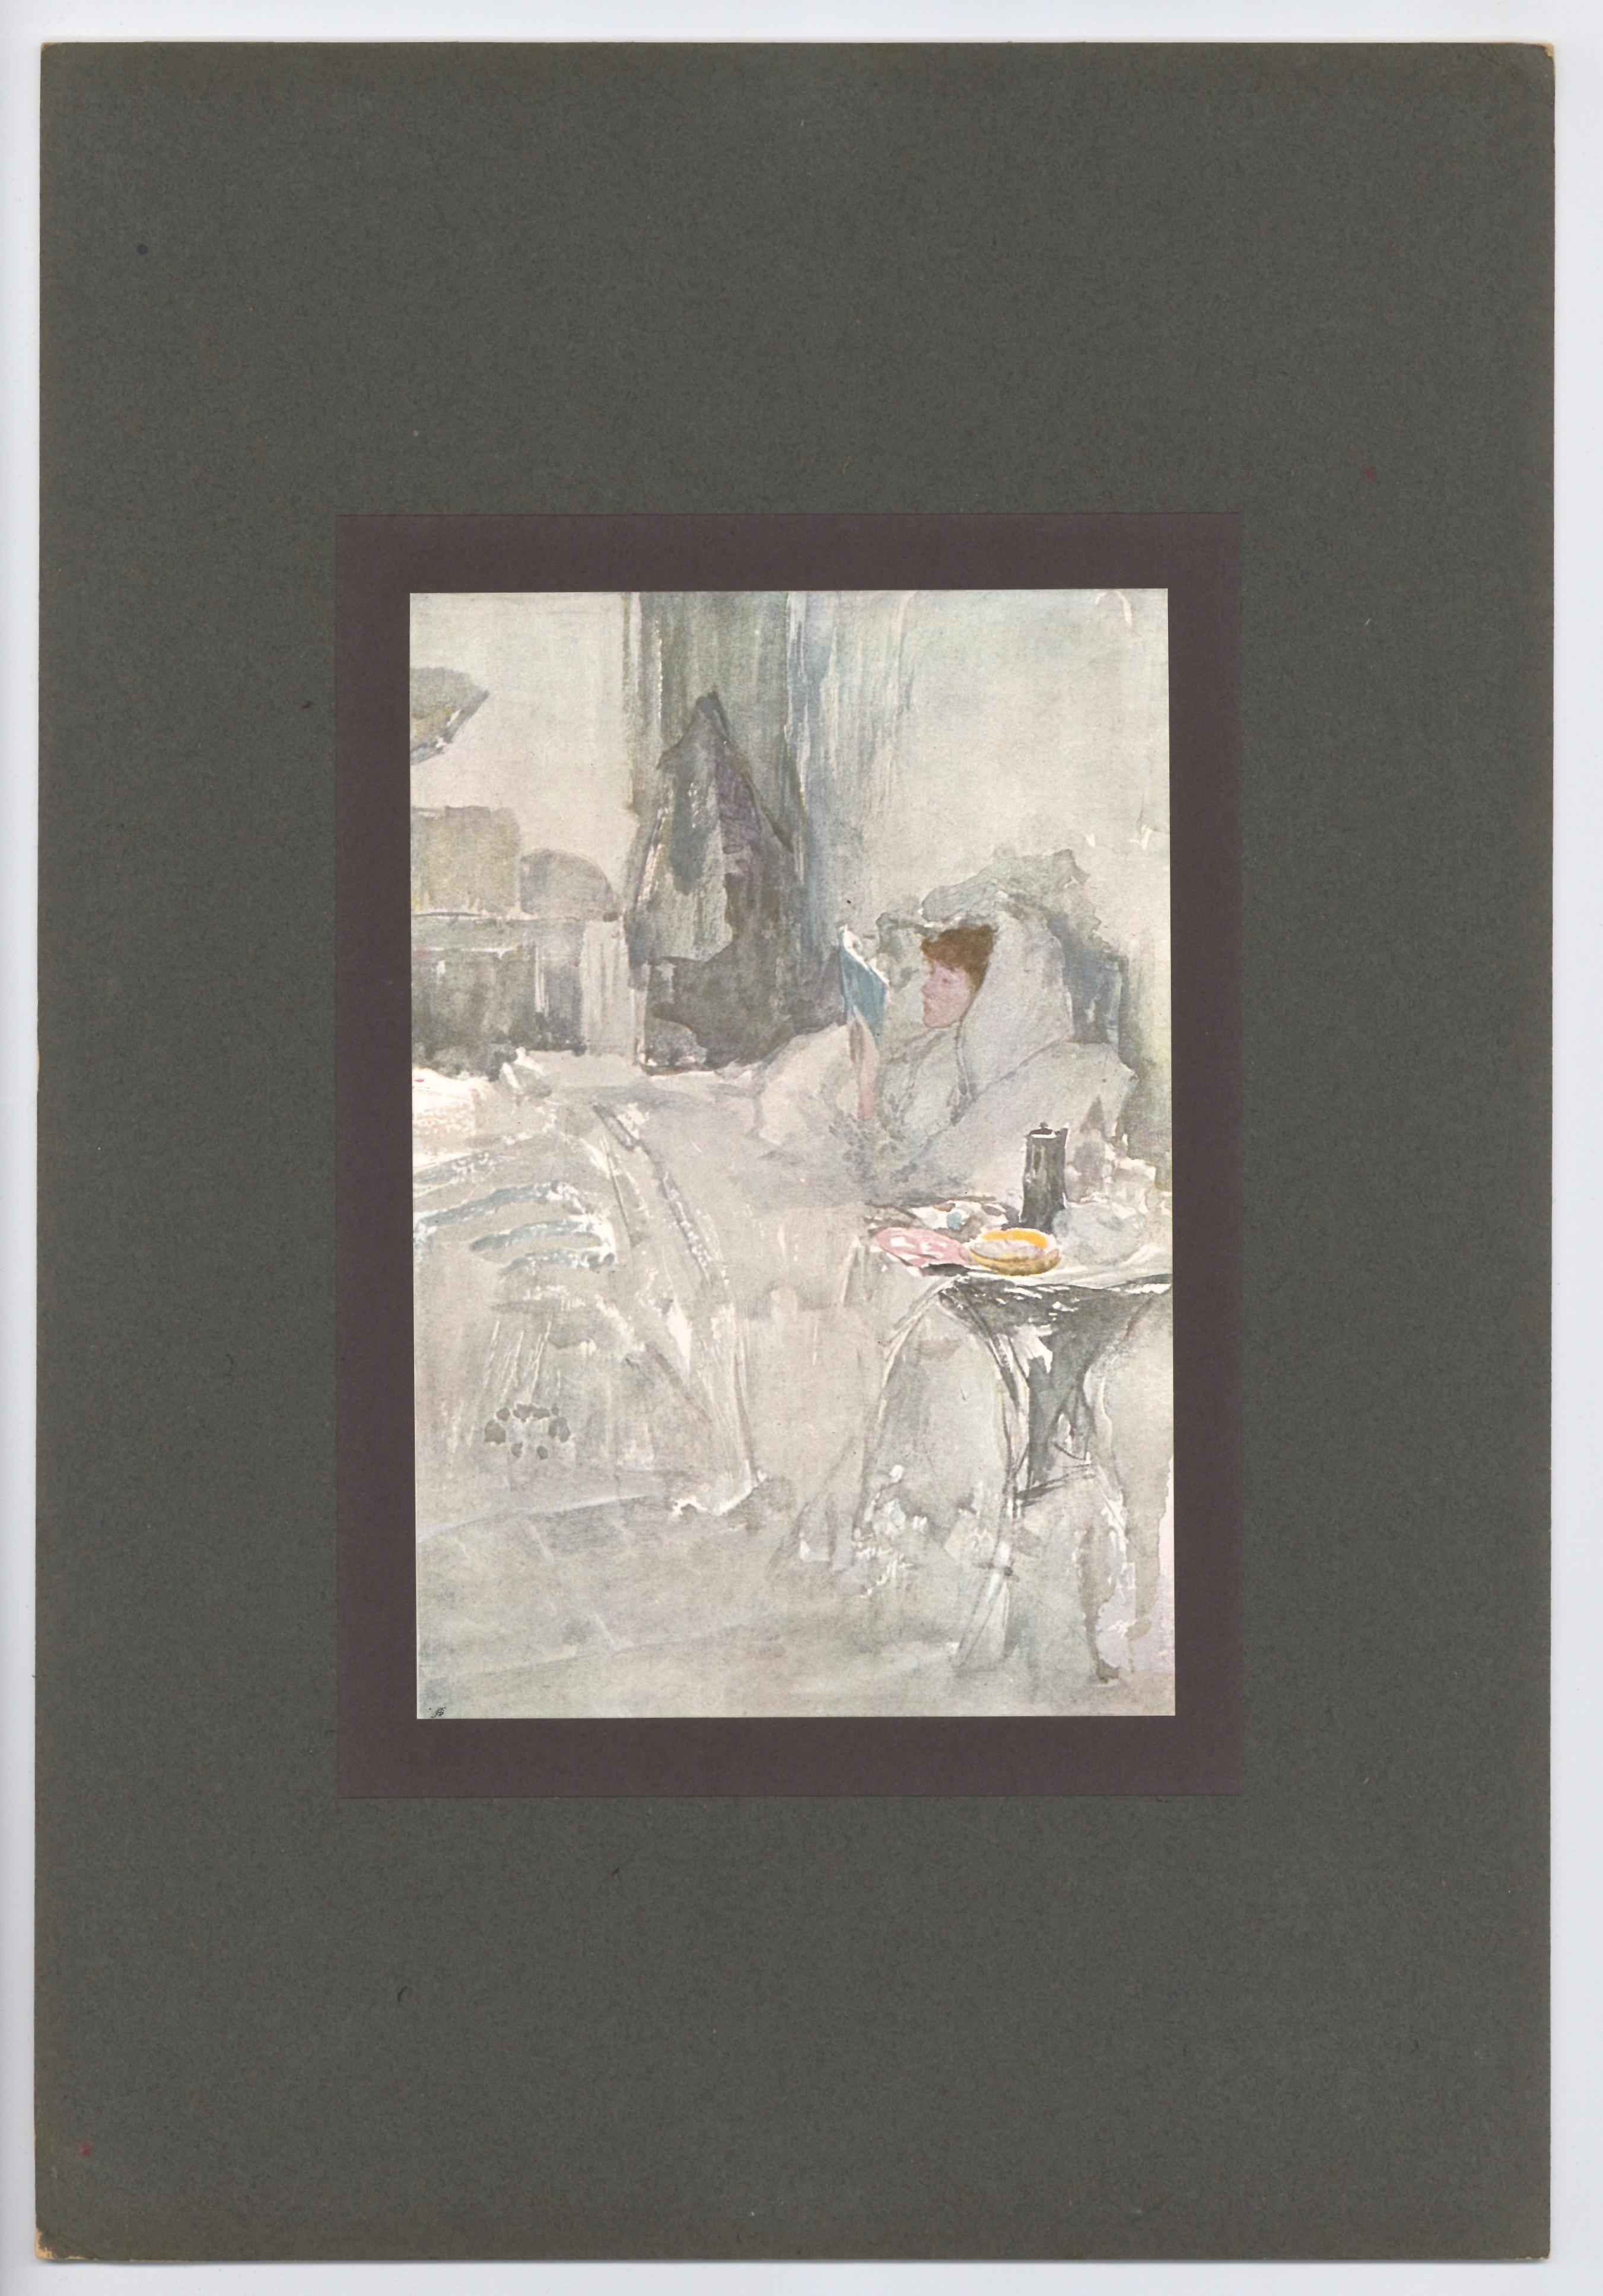 Medium: offset lithograph (after the watercolor). Published in London by The Studio in 1905 for a rare deluxe portfolio. Printed on smooth wove paper, the image measures 7 3/4 x 5 1/4 inches (200 x 135 mm). Not signed.

Condition: as originally